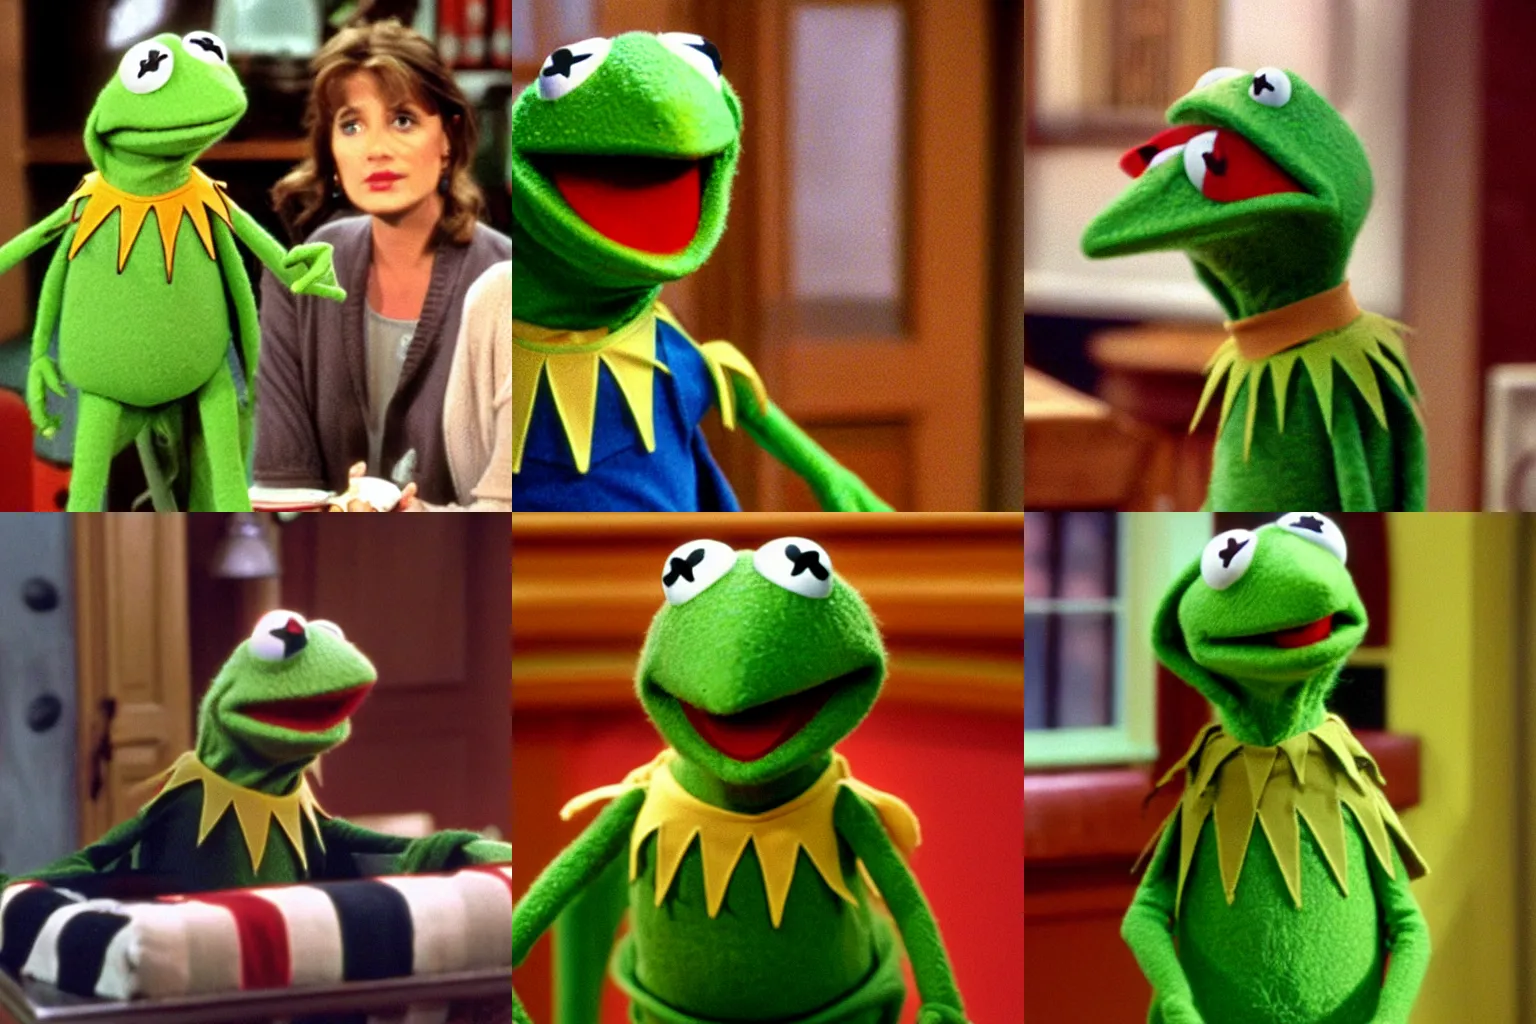 Prompt: Kermit the Frog, from TV show Friends, Season 3 (1997)